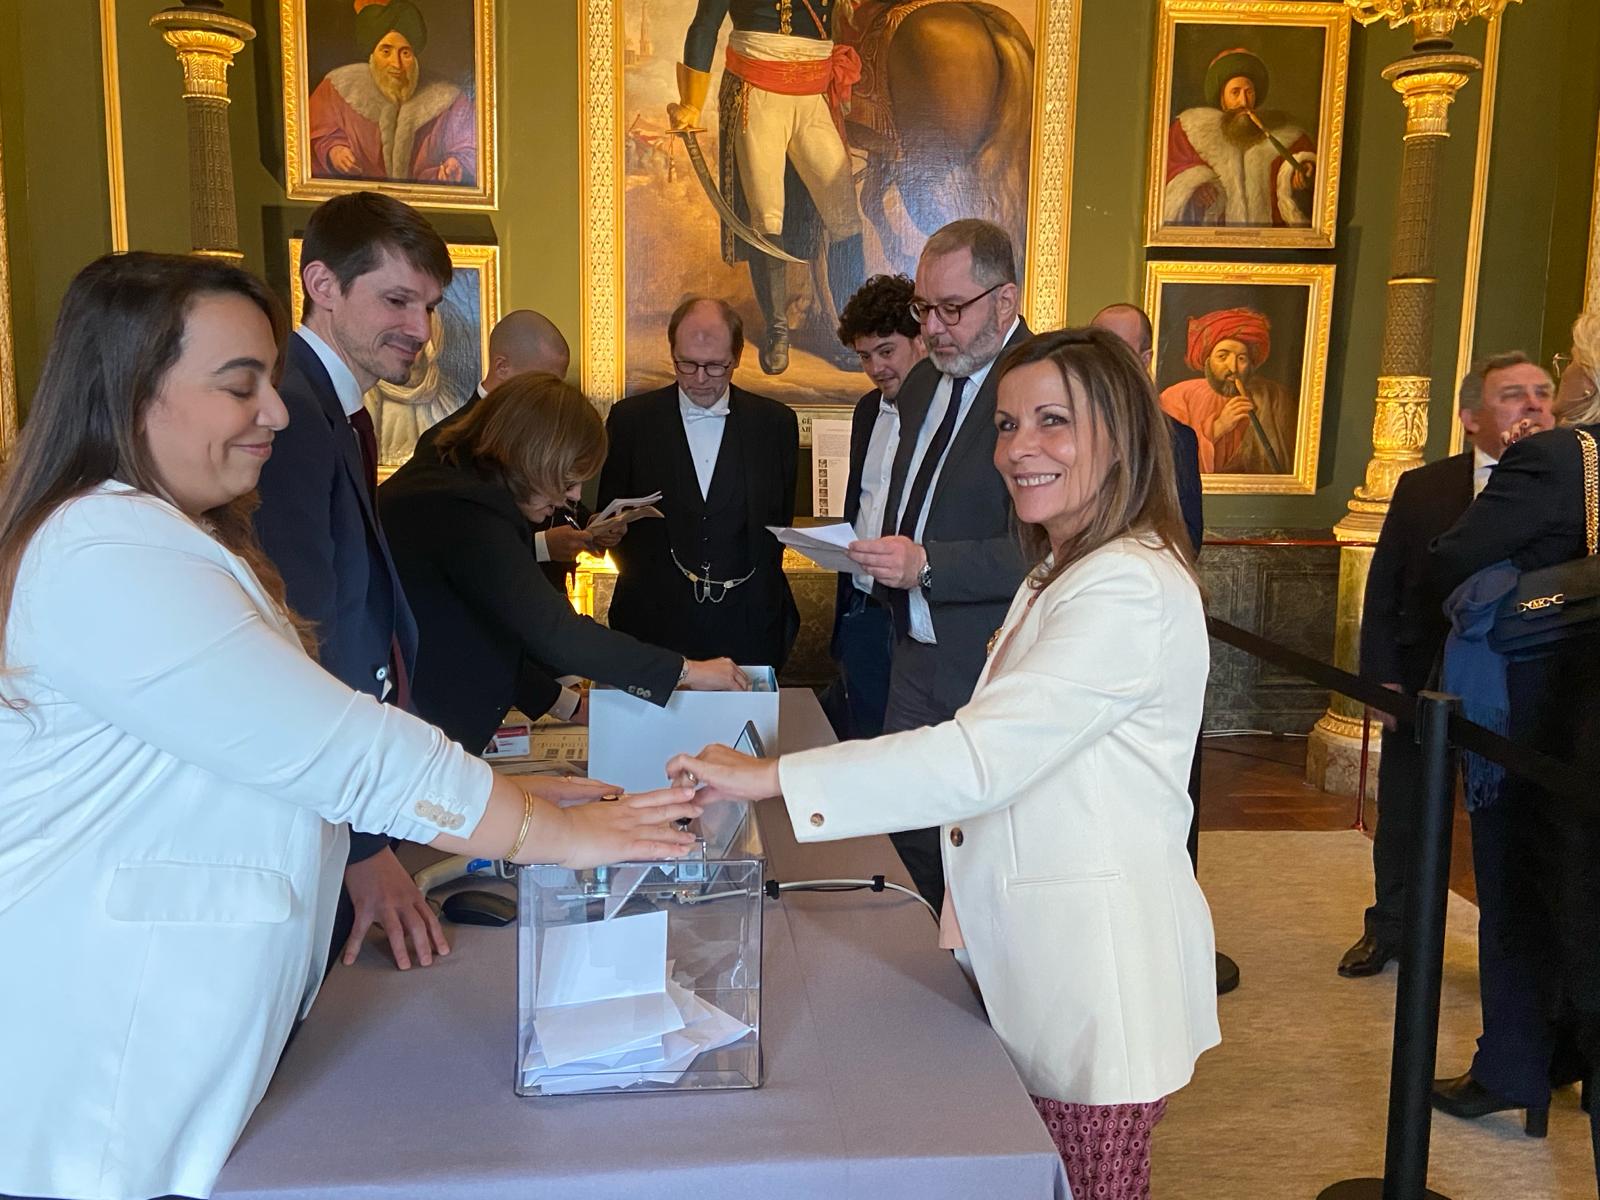 An image capturing the moment Congresswoman Isabelle Santiago casts her vote during a historic session at Versailles. This vote contributes to France becoming the first country to constitutionally safeguard abortion rights.